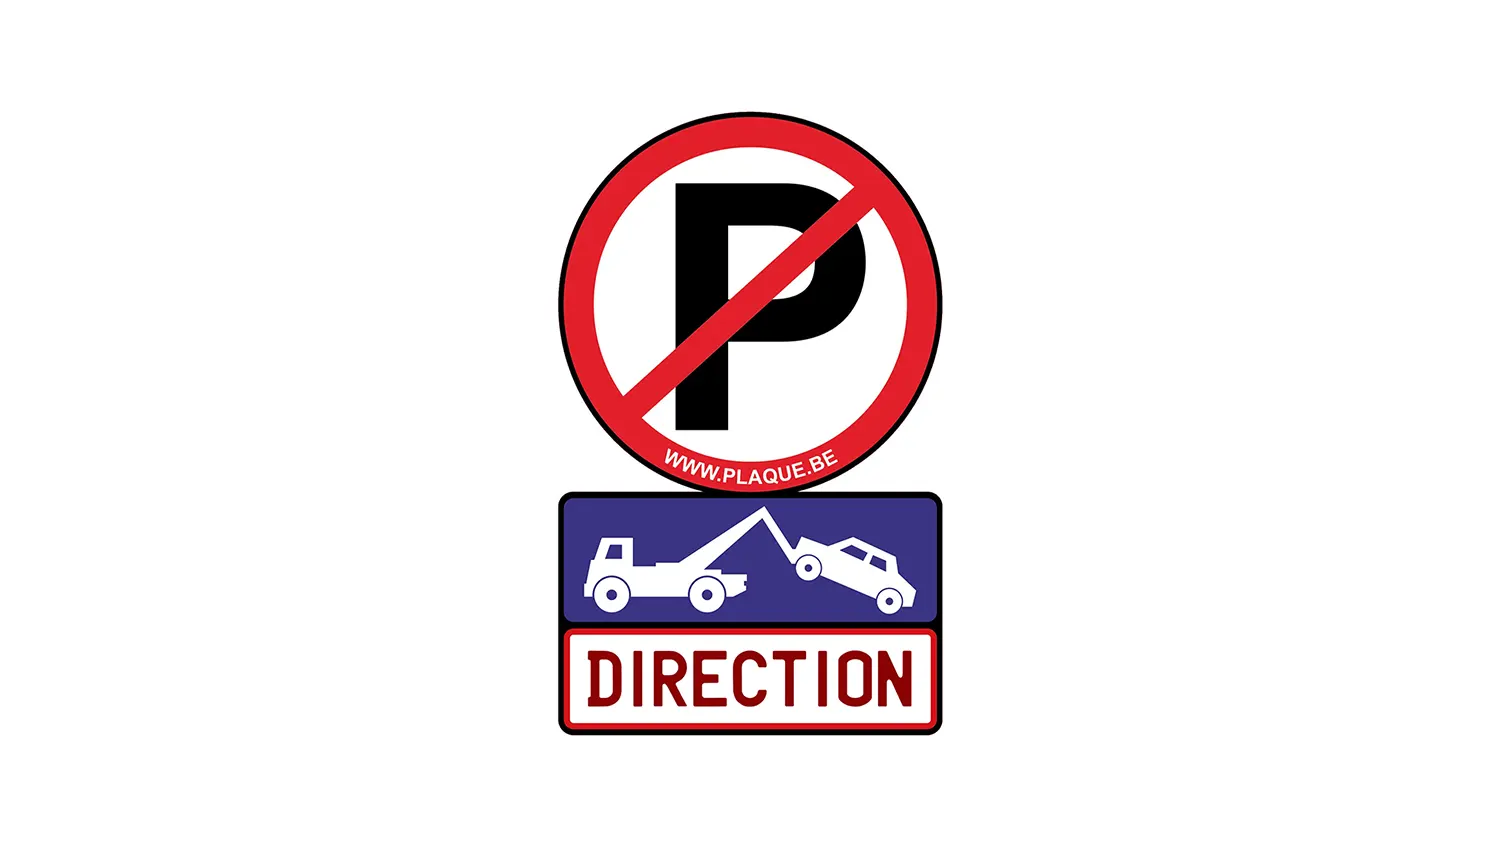 example of a direction sign